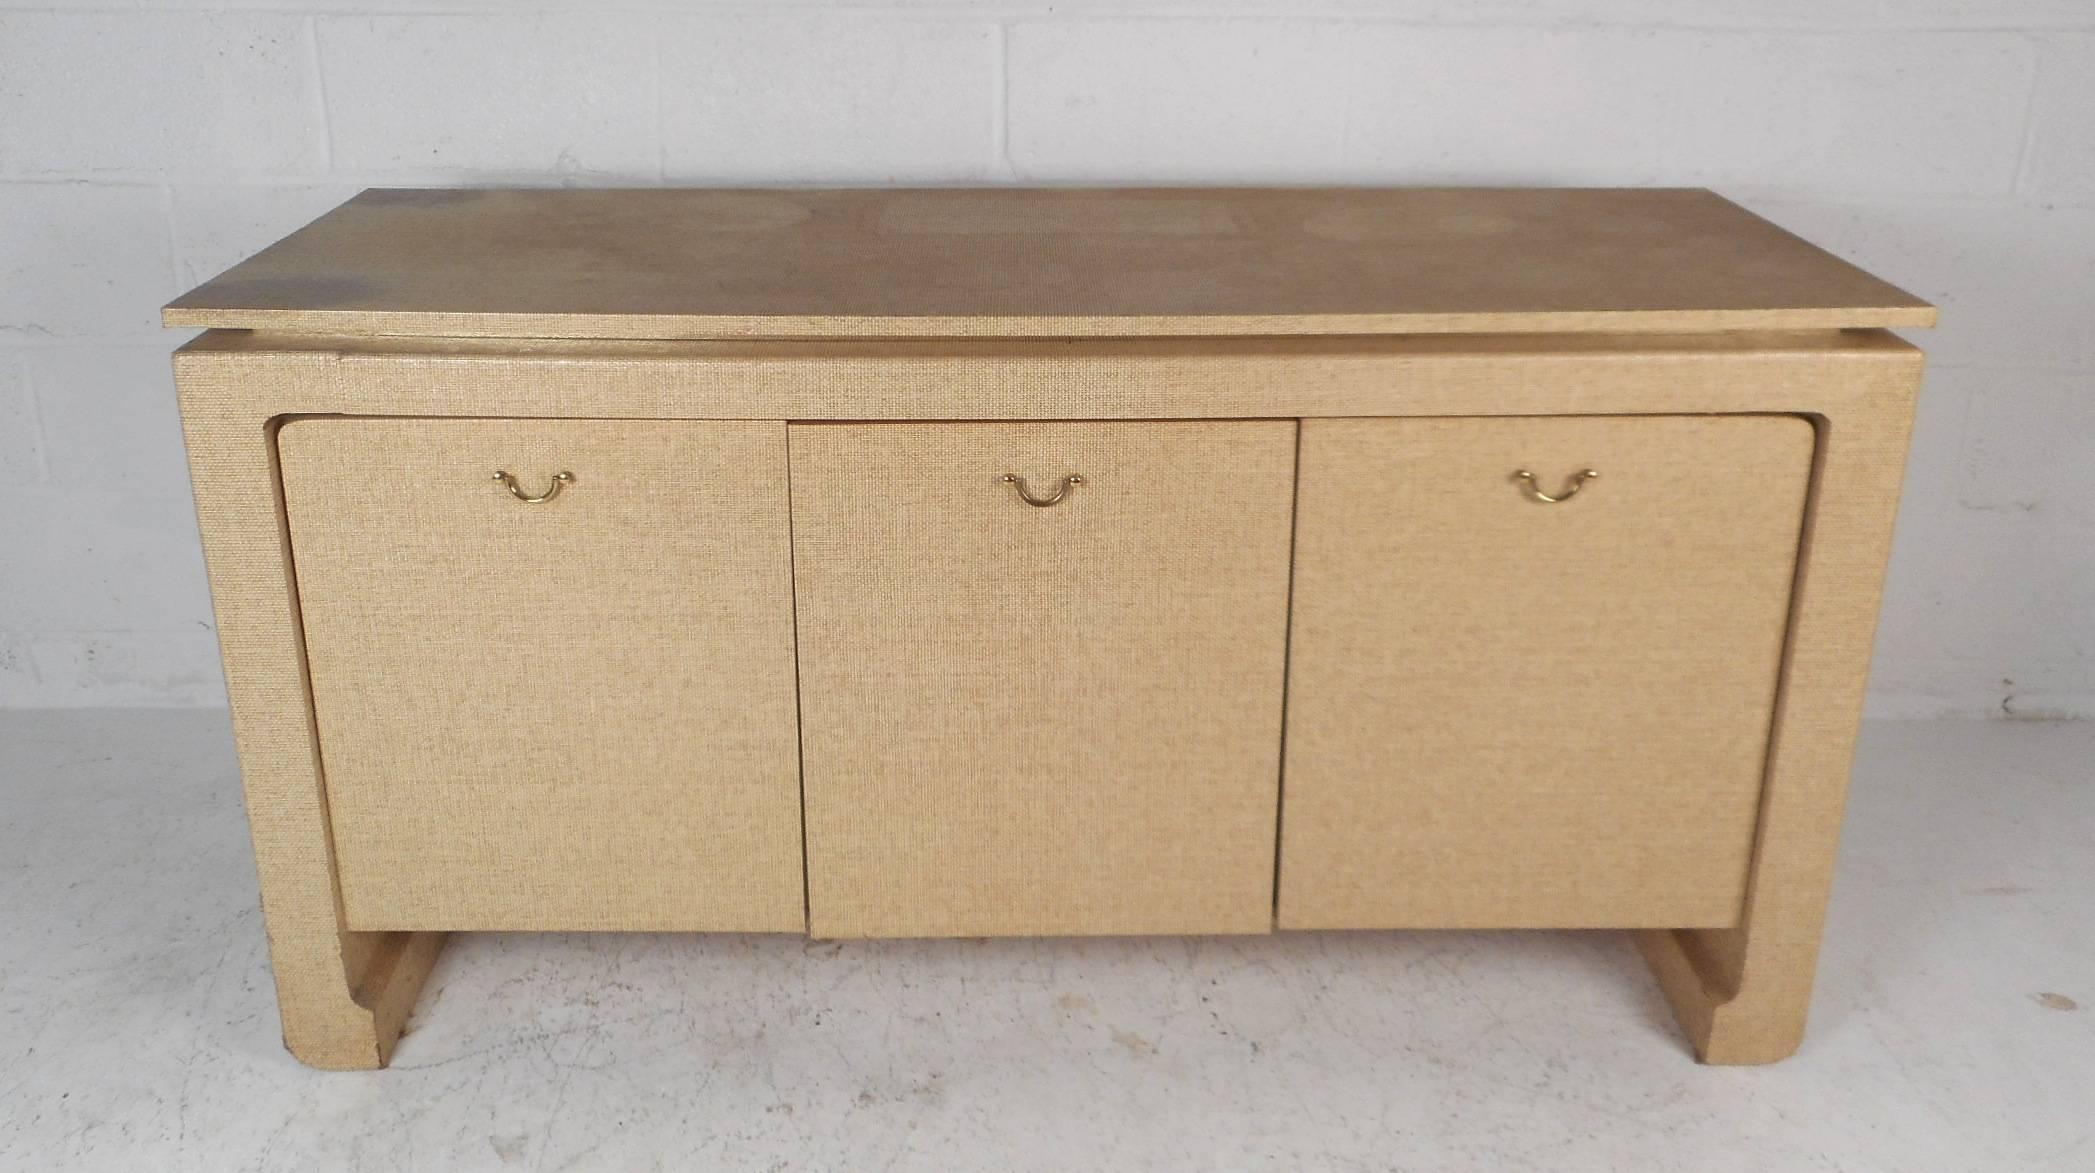 This beautiful vintage modern sideboard features three cabinet doors with unique brass pulls that open up to unveil large compartments with shelves. Unusual design covered in grass cloth with stylish brass trim wrapping around the underside of the